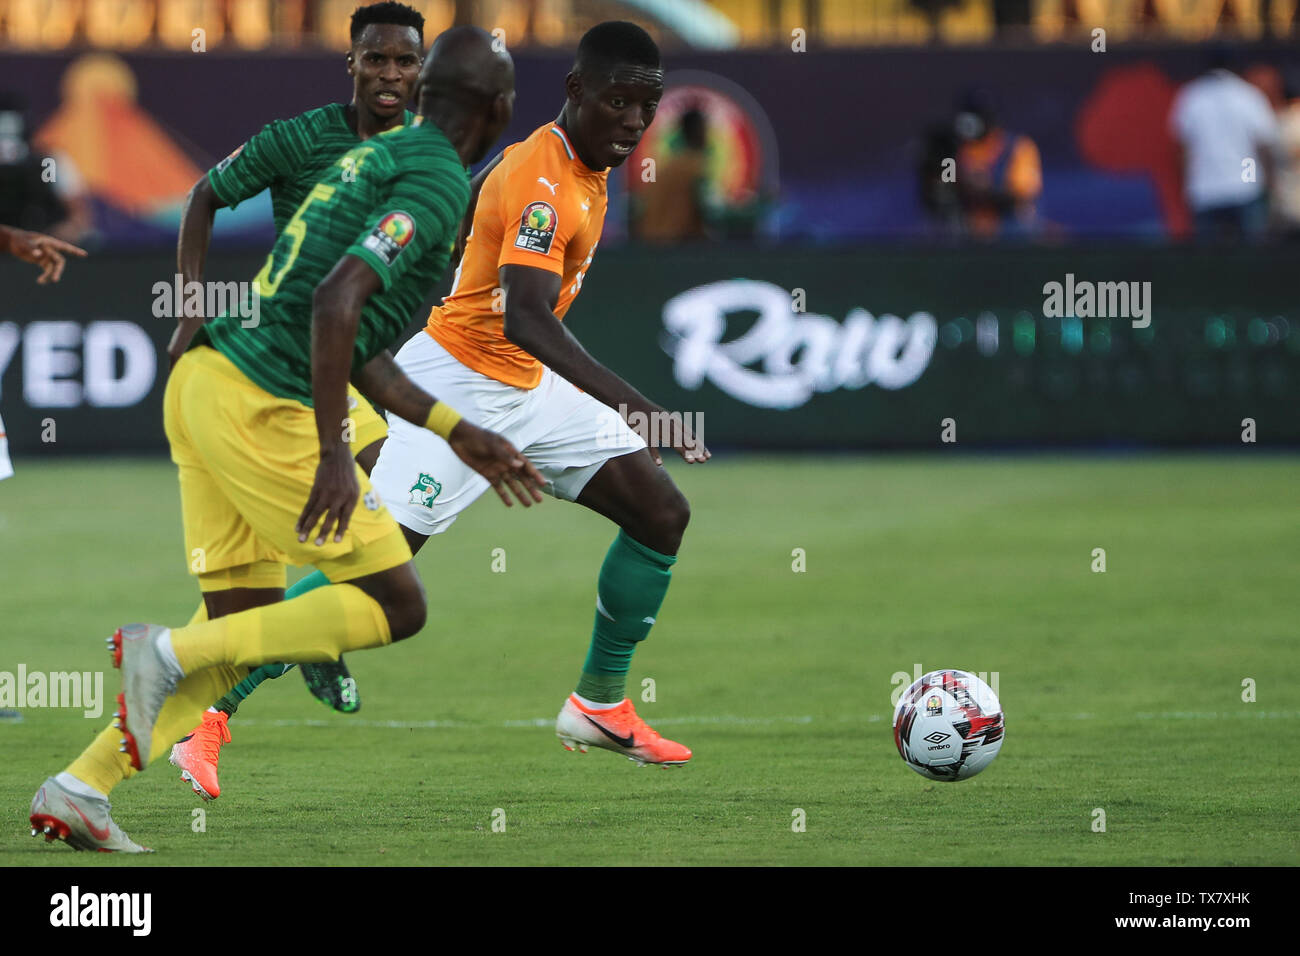 Cairo, Egypt. 24th June, 2019. Ivory coast's Max-Alain Gradel and South Africa's Thamsanqa Mkhize battle for the ball during the 2019 Africa Cup of Nations Group D soccer match between South Africa and Ivory coast at Al-Salam Stadium. Credit: Omar Zoheiry/dpa/Alamy Live News Stock Photo